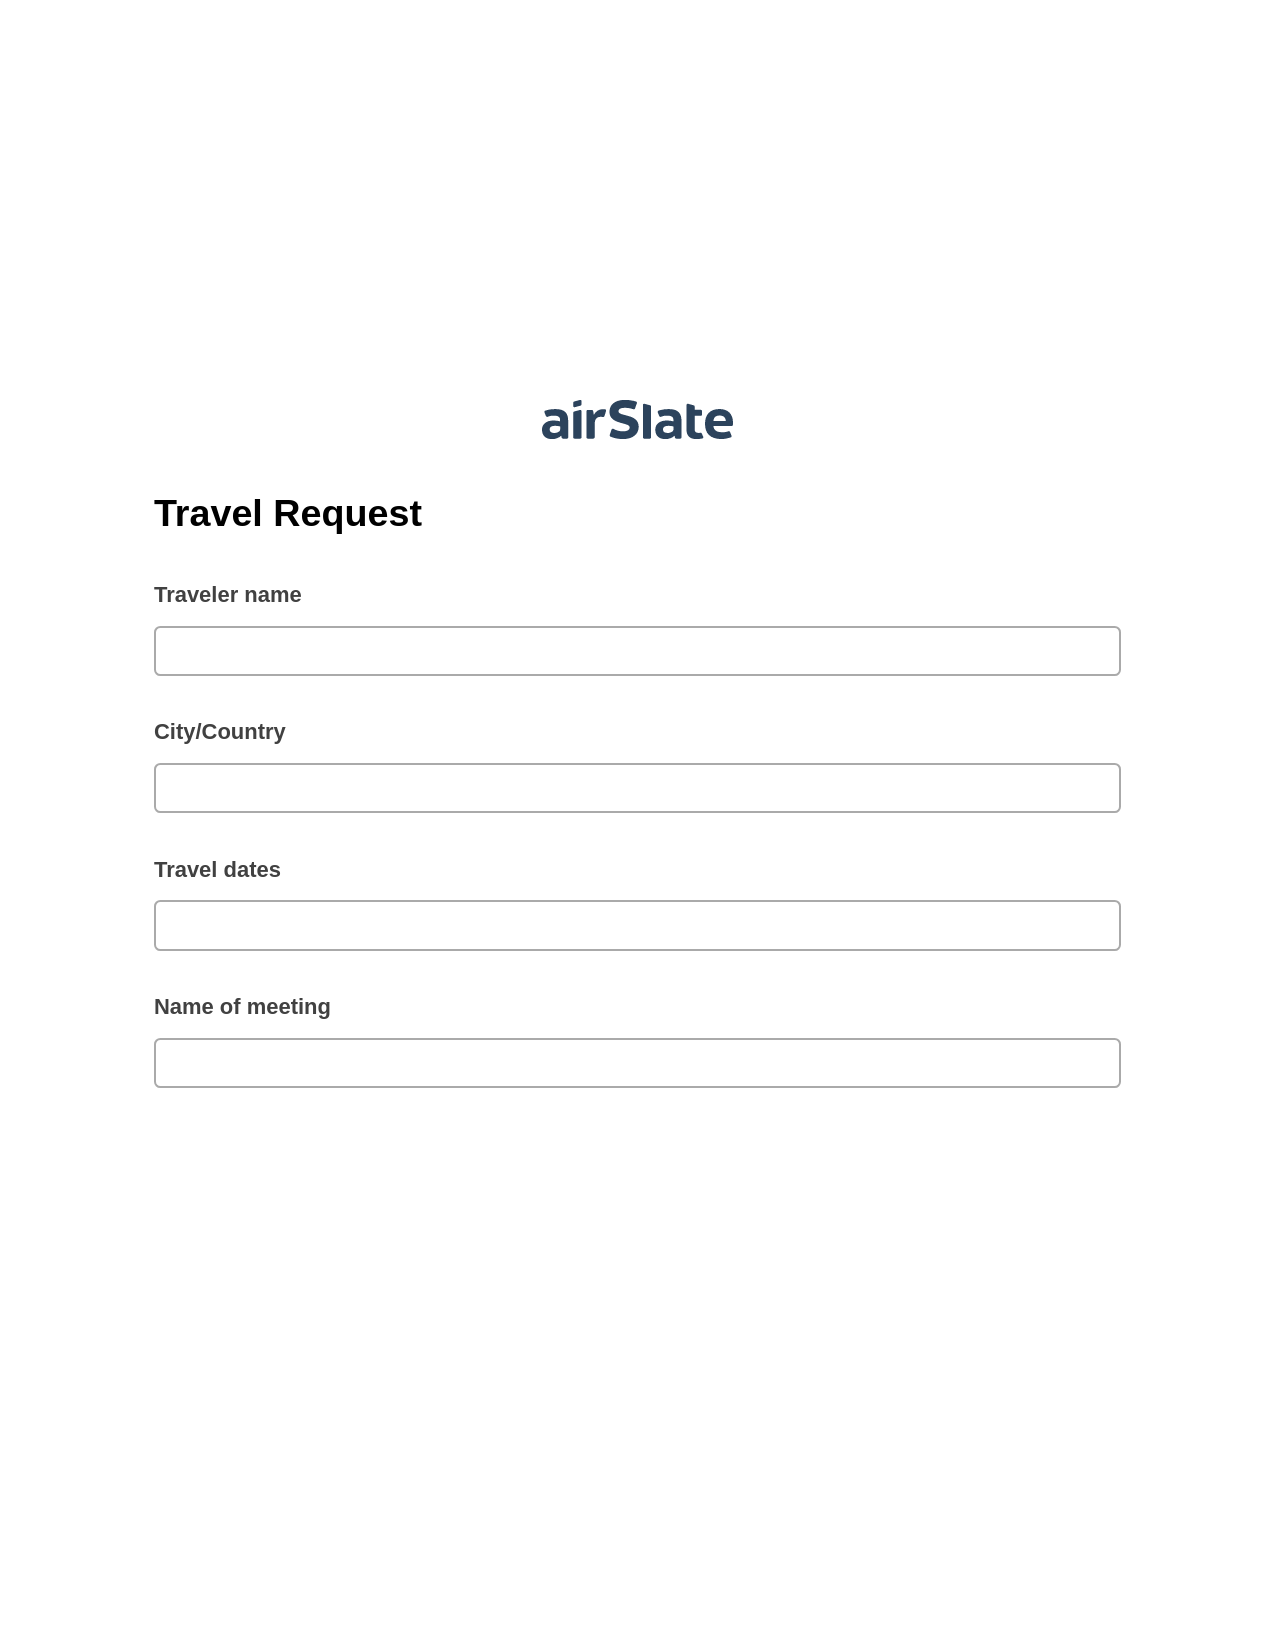 Travel Request Pre-fill from CSV File Bot, Jira Bot, Box Bot